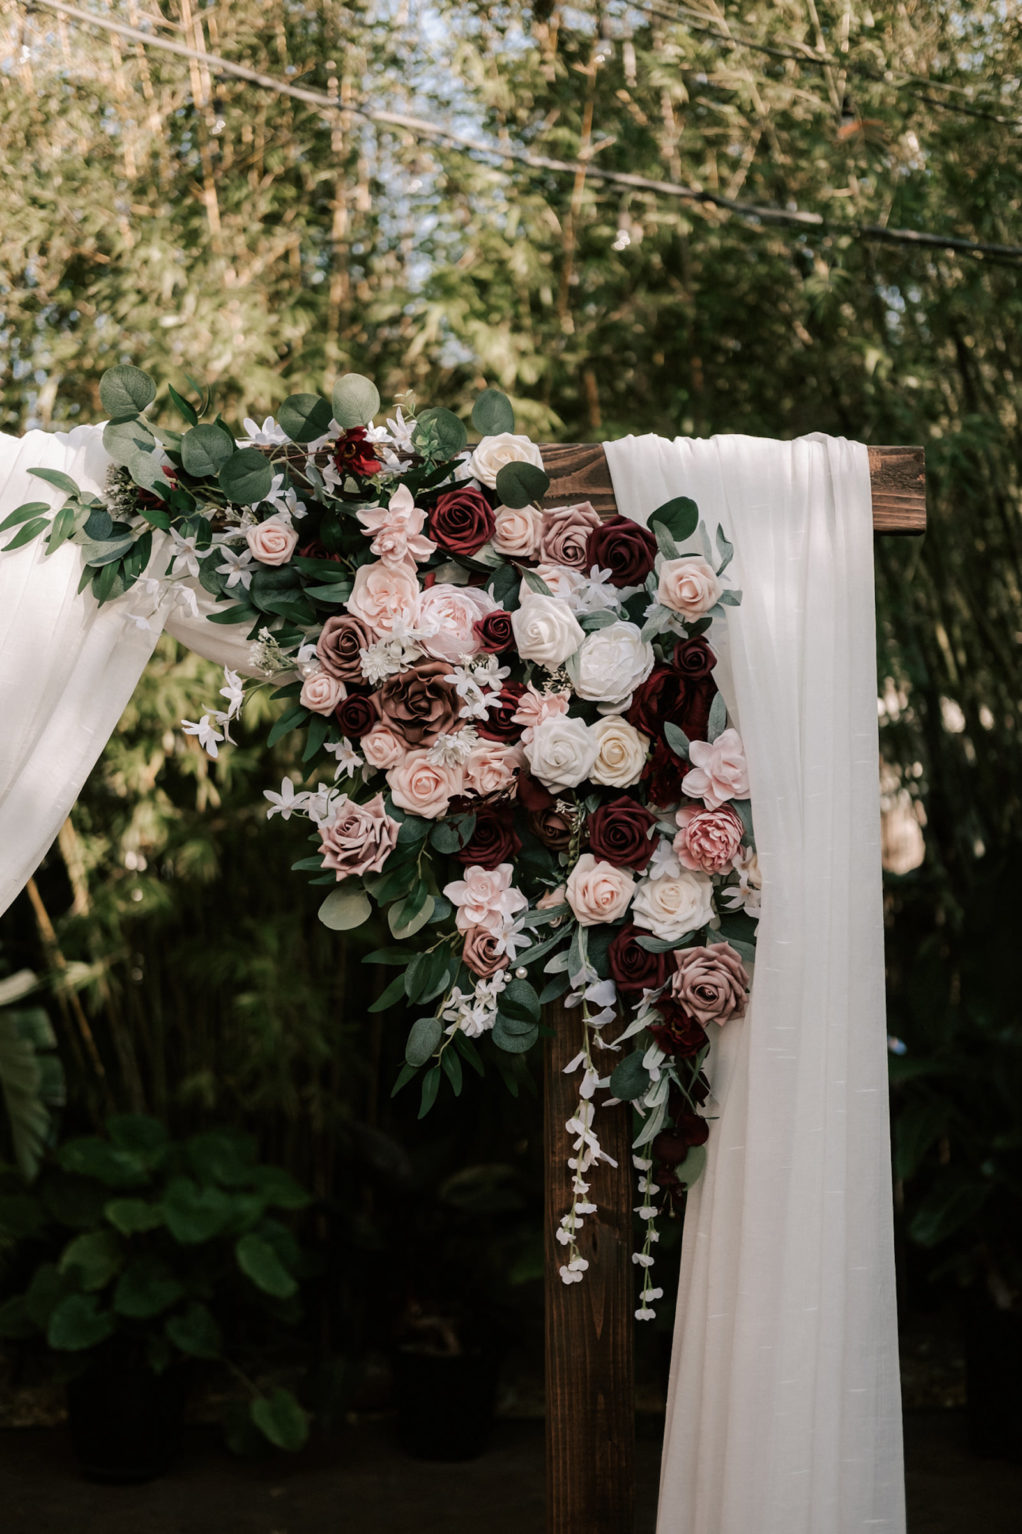 Industrial Inspired Wedding with Romantic Moody Florals, Ceremony Arch with Soft White Draping, Pink, Red, White and Burgundy Roses with Eucalyptus Greenery | Tampa Bay's Best Wedding Venue NOVA 535 in Downtown St. Pete Florida